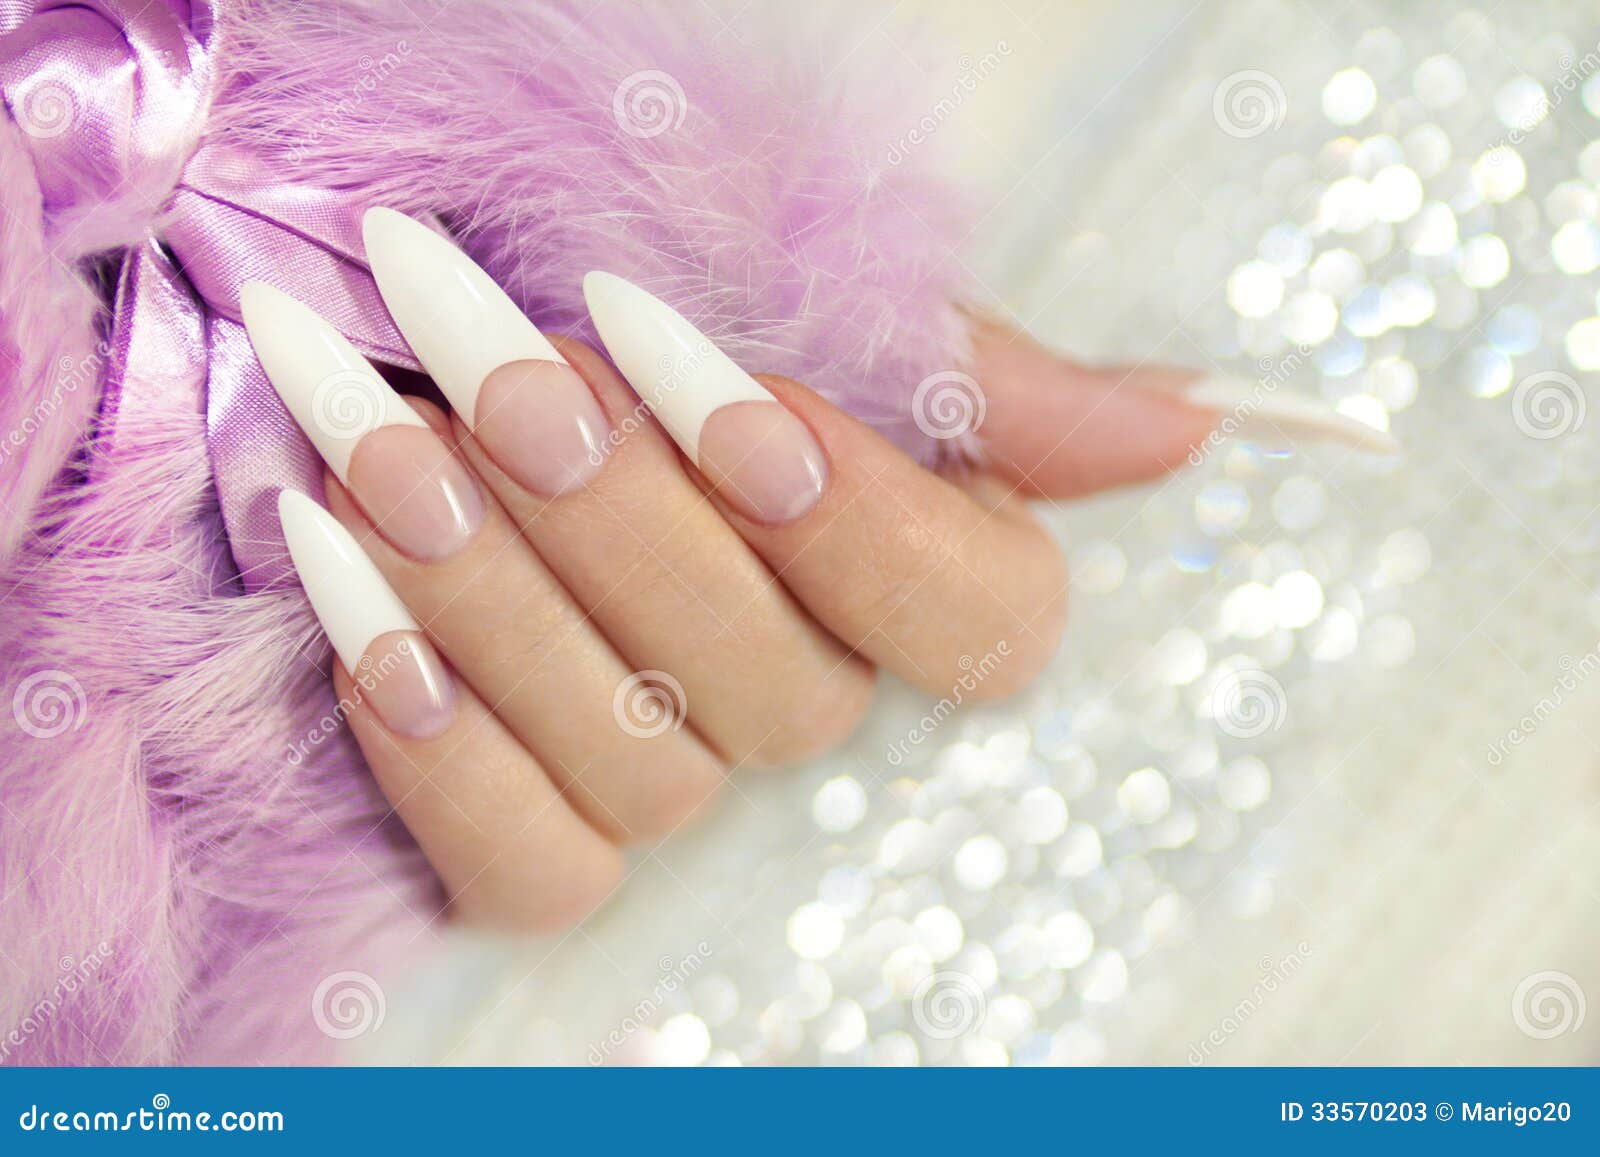 French long manicure. stock image. Image of cosmetics - 33570203